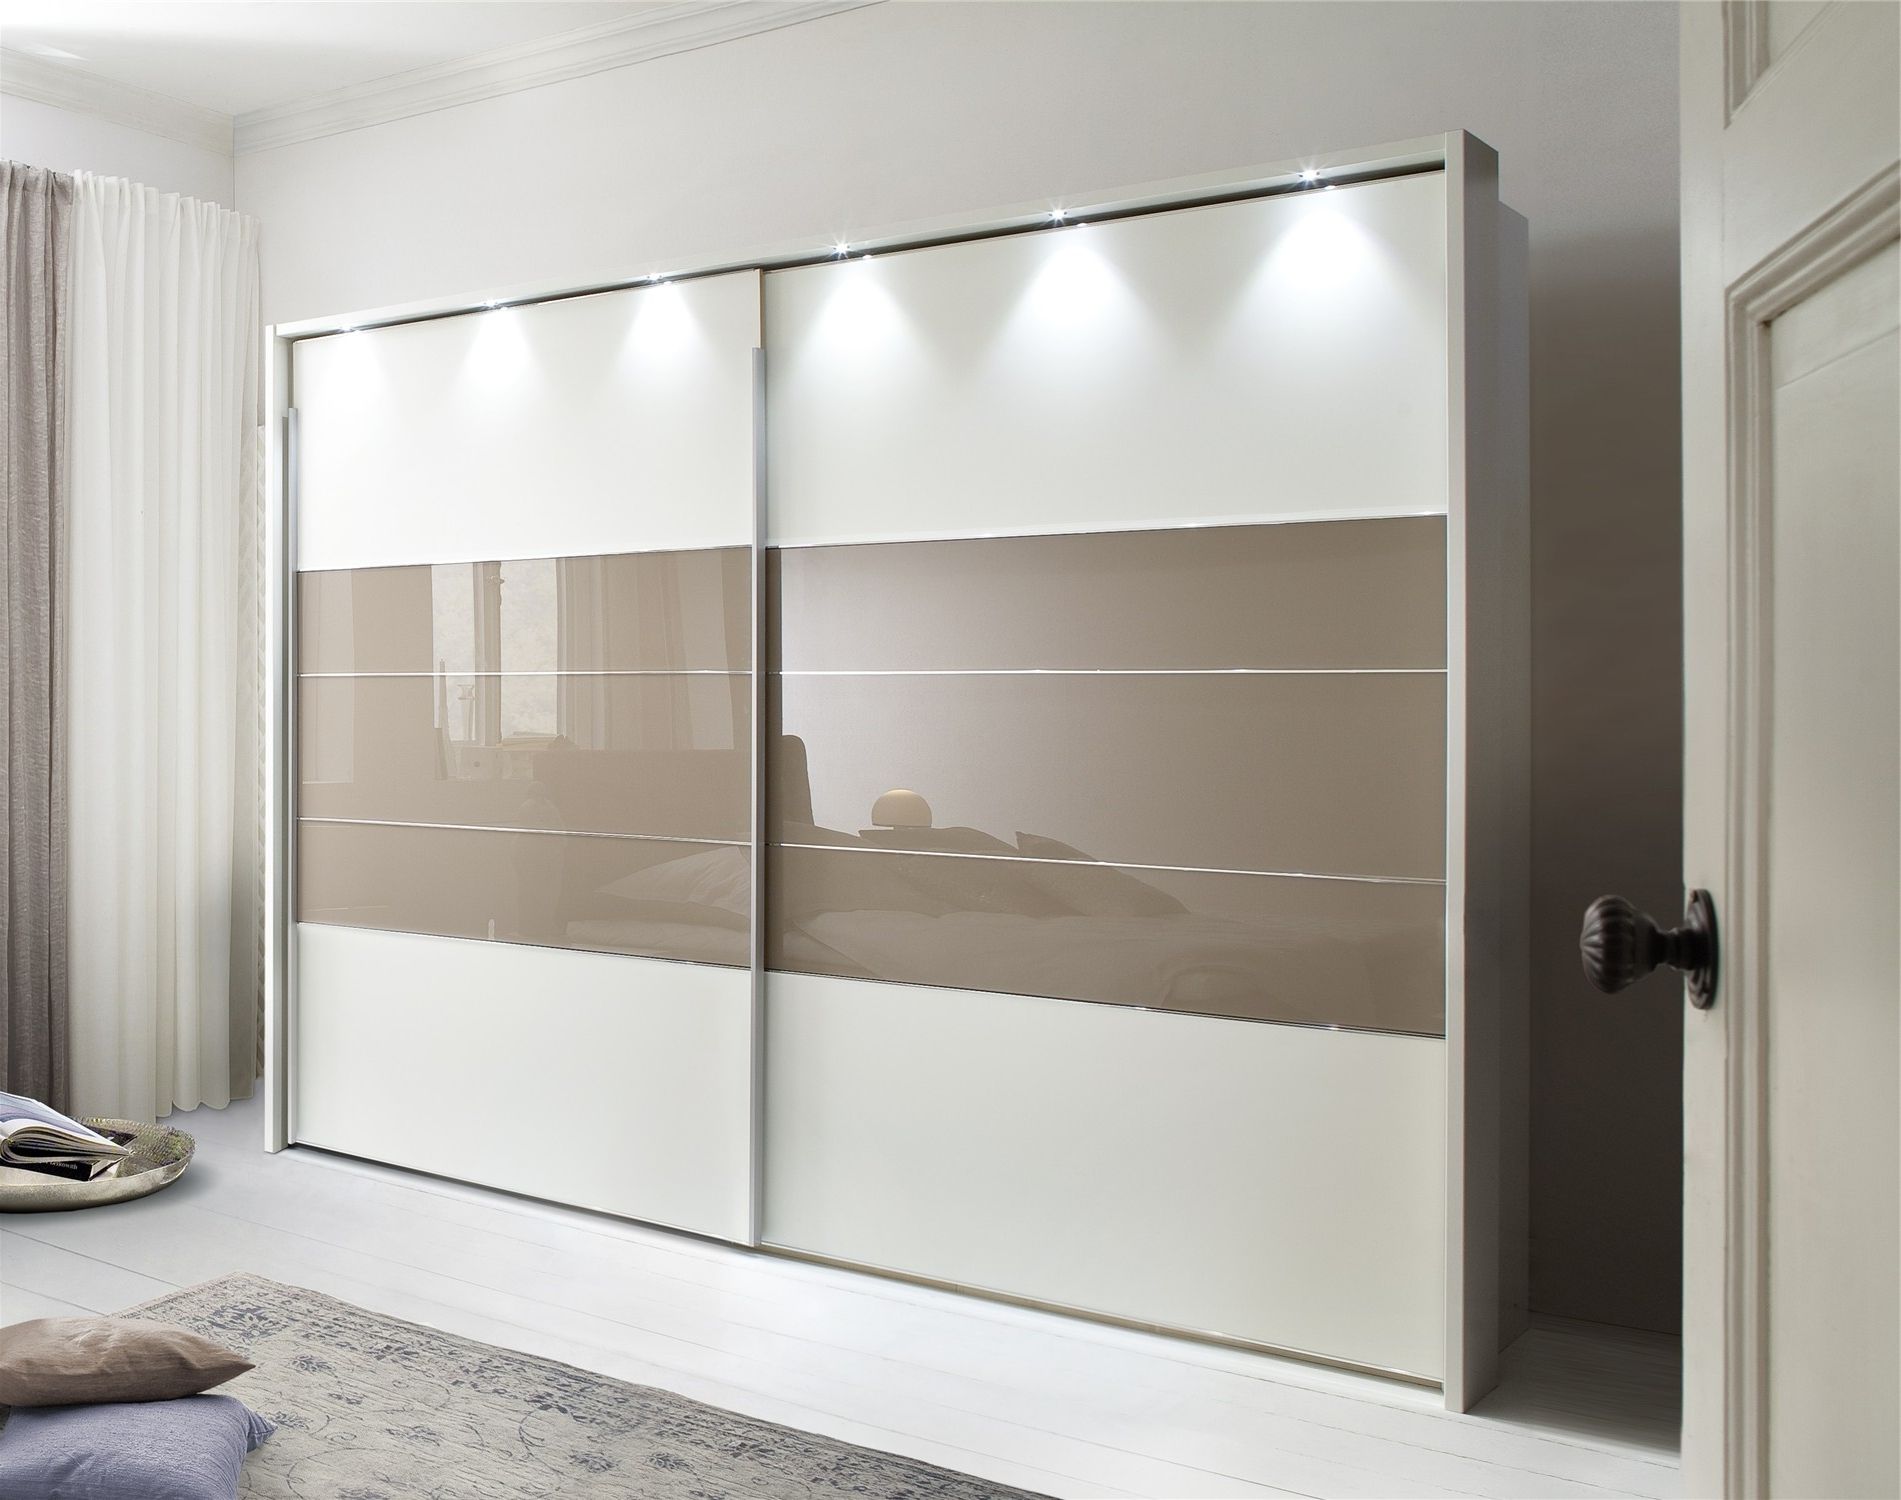 Mirror Design Ideas: Wood Glass Wardrobe With Mirror Sliding Doors Throughout Best And Newest Oak Mirrored Wardrobes (View 11 of 15)